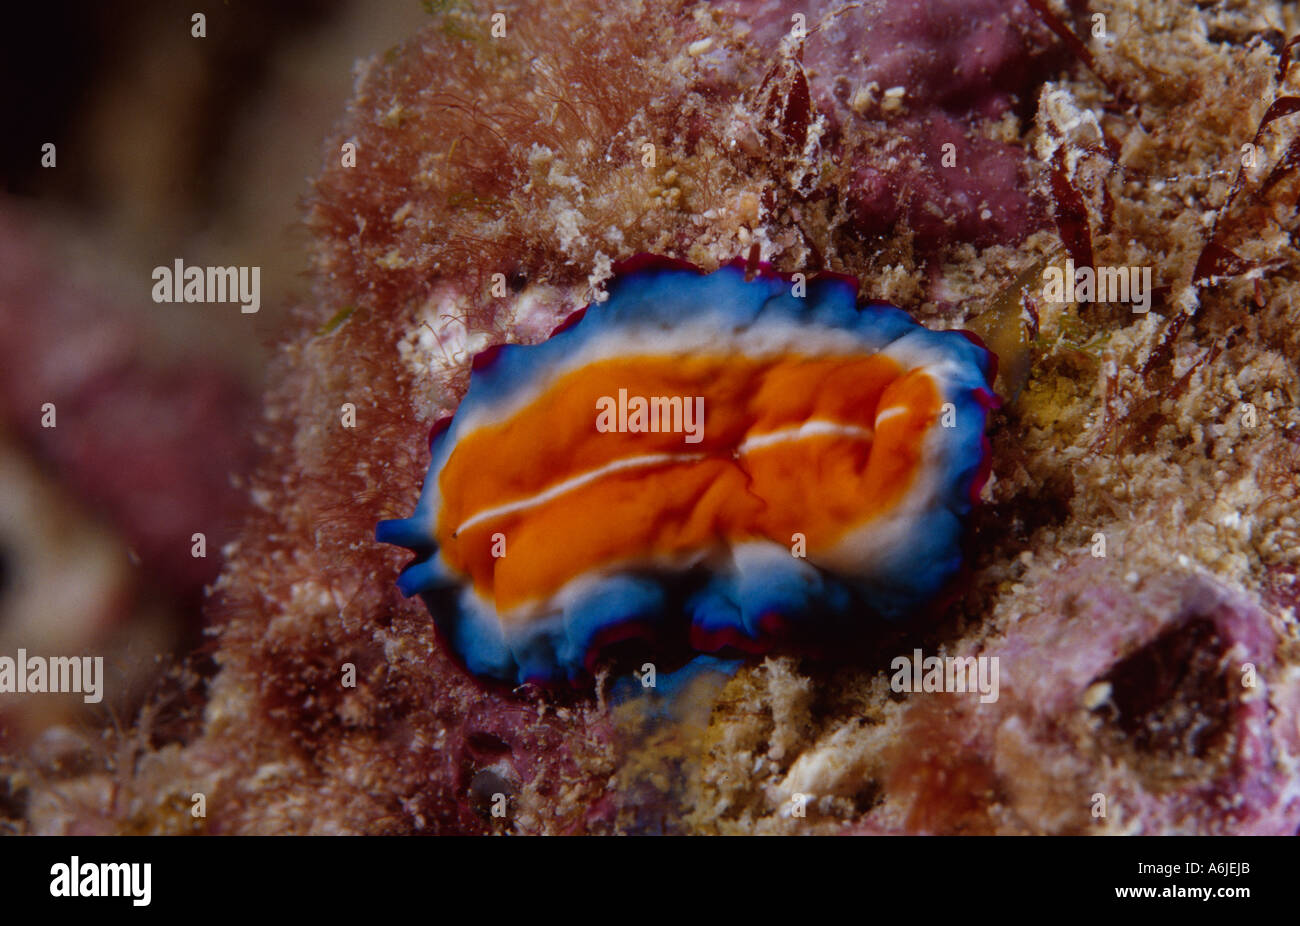 Polyclad flatworm in a coral reef, Pseudobiceros ferrugineus Stock Photo